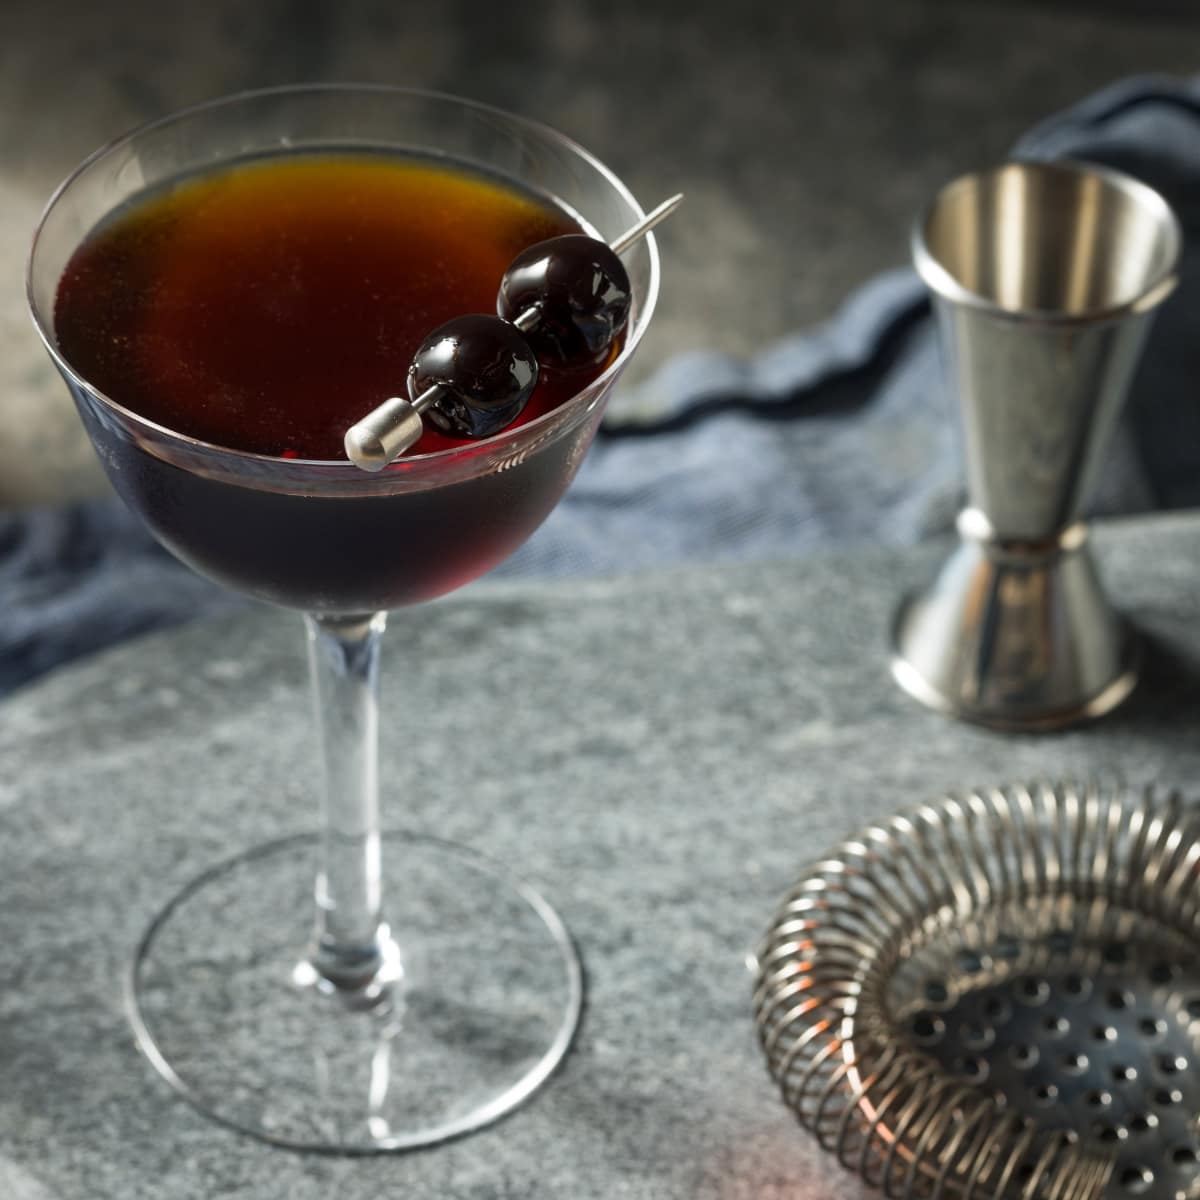 Mixer, Strainer, Shot Measurer, and a Glass of Black Manhattan Cocktail with a Black Cherry Garnish